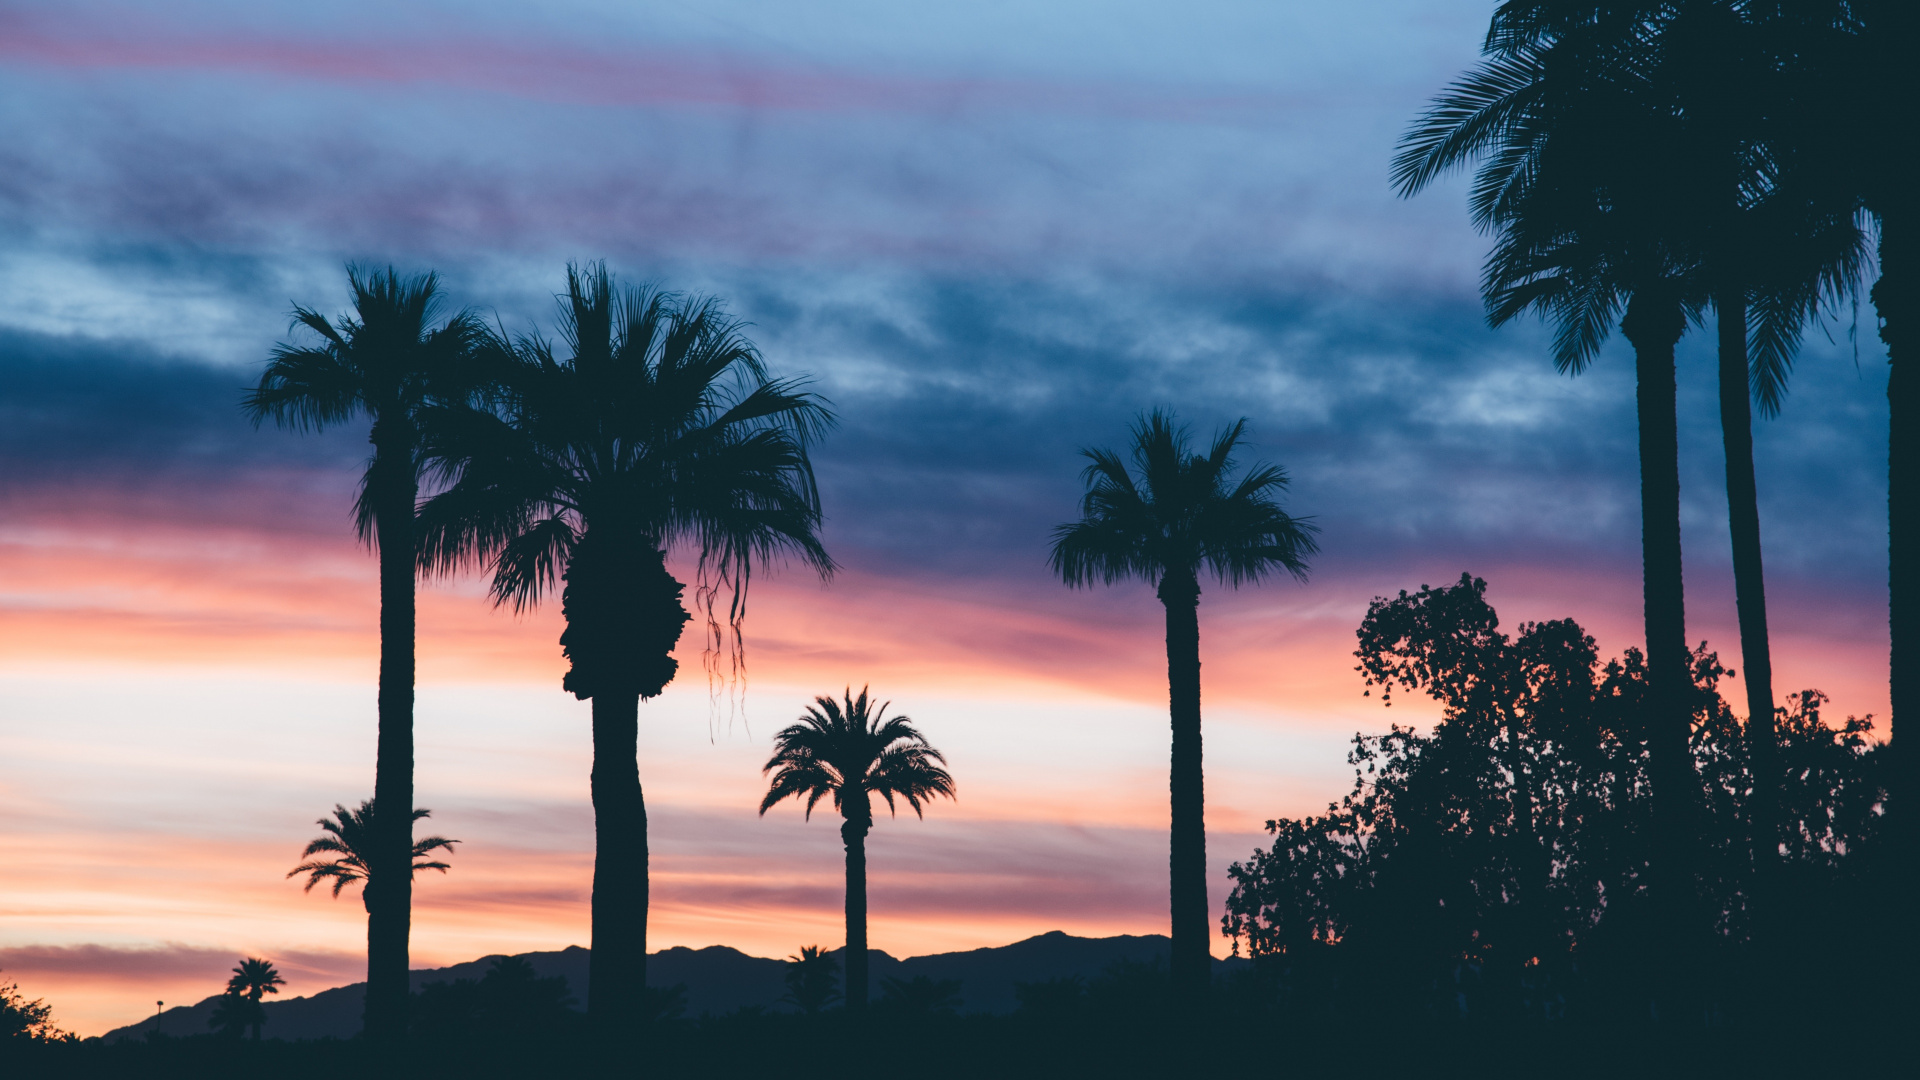 Silhouette of Palm Trees During Sunset. Wallpaper in 1920x1080 Resolution